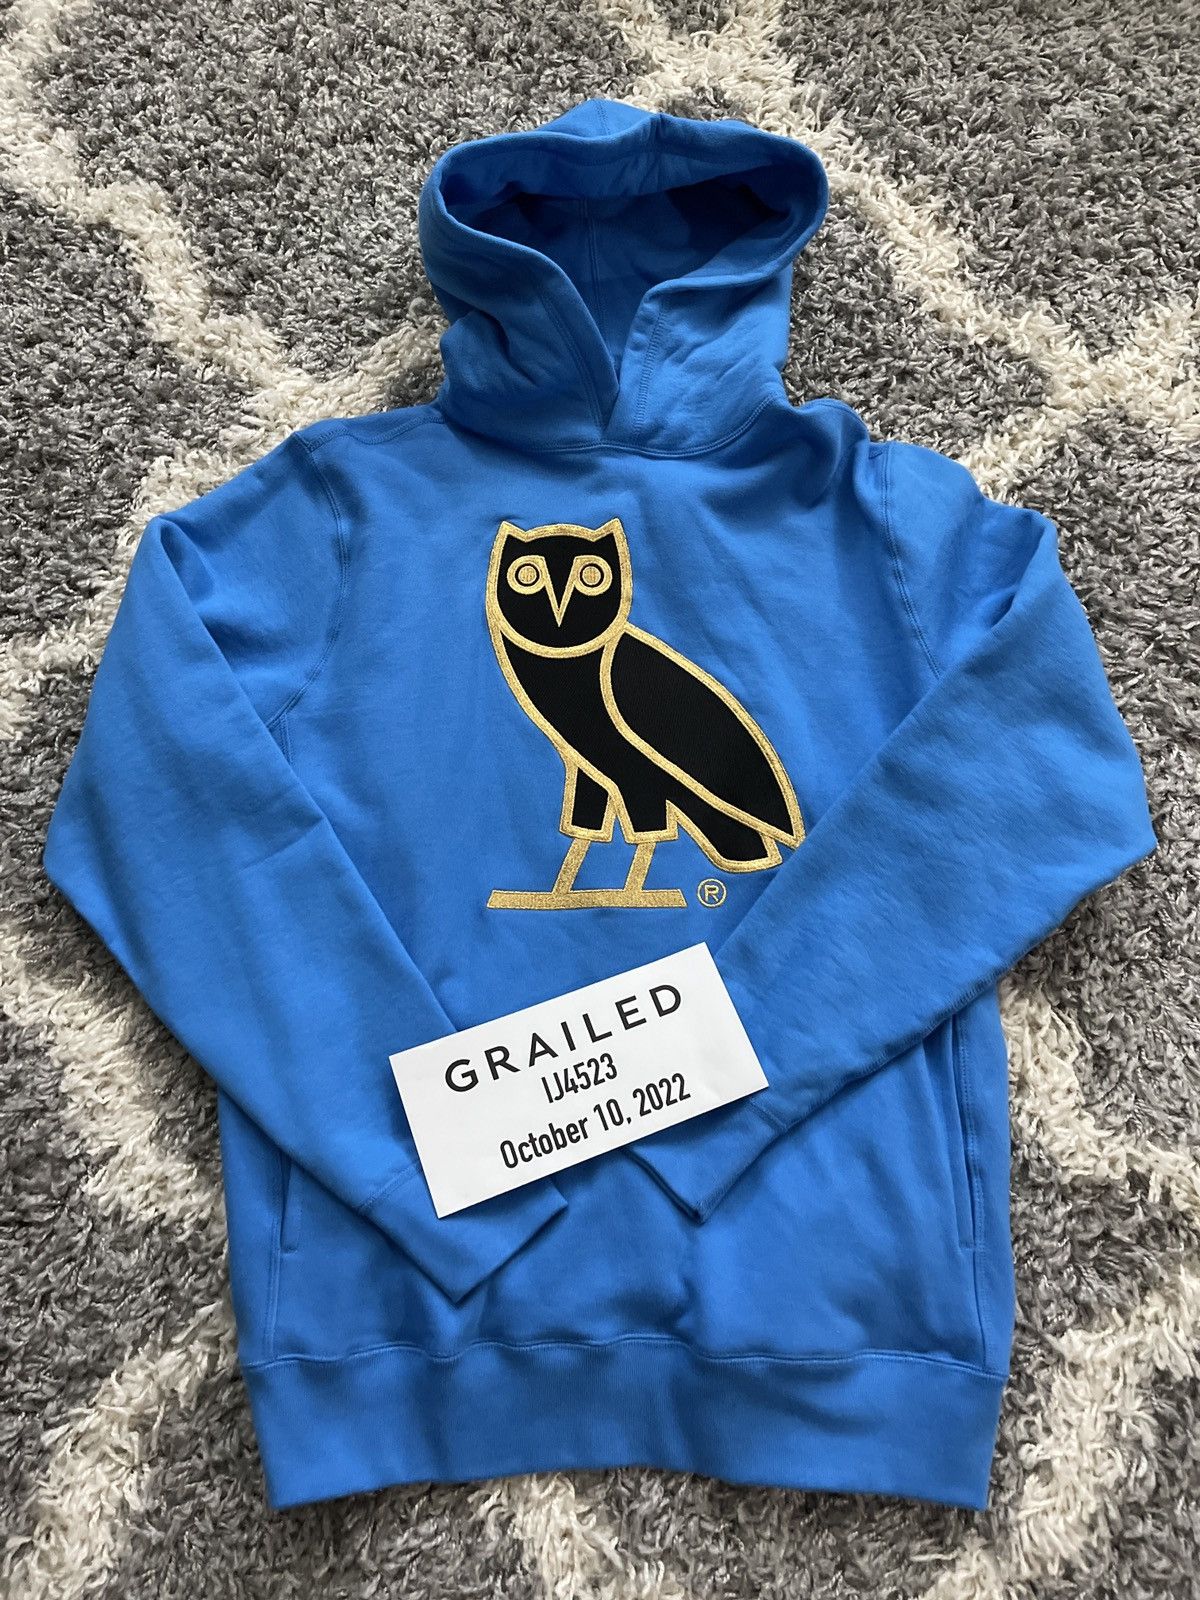 Octobers Very Own OVO Classic Owl Hoodie Bright Blue Sz L Preowned Size US L / EU 52-54 / 3 - 1 Preview